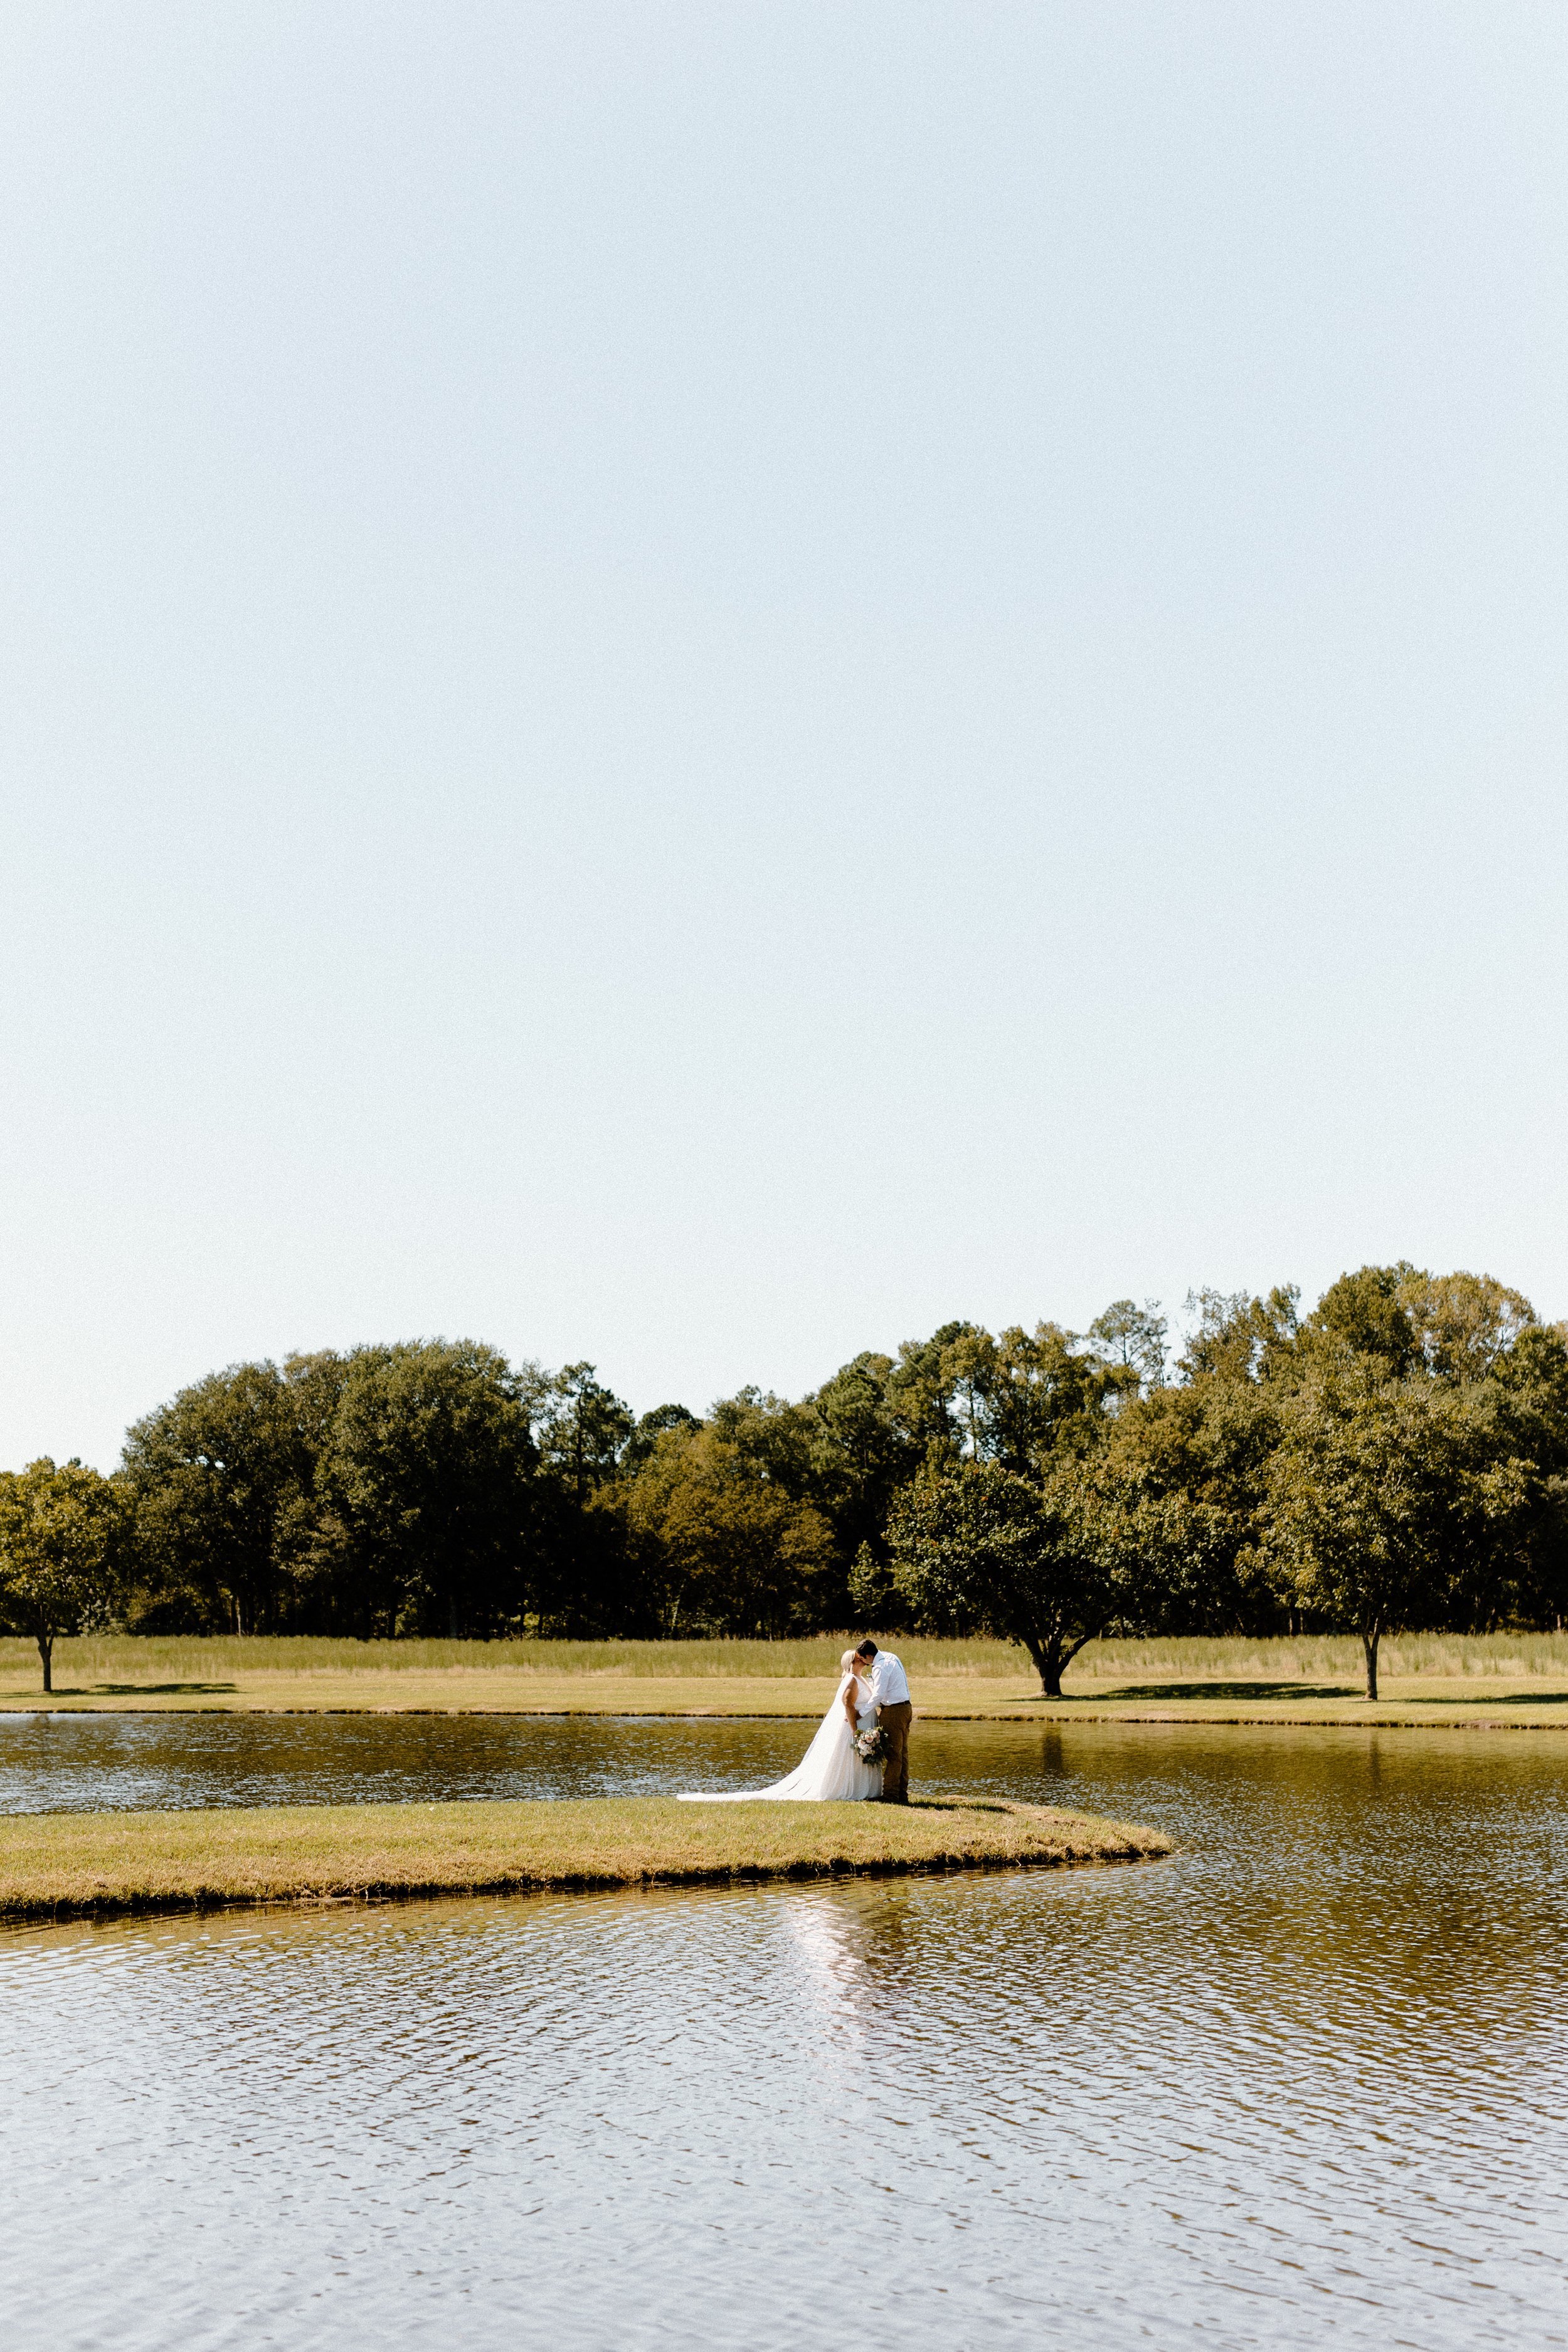 ivory-and-beau-blog-down-for-the-gown-ashley-real-bride-made-with-love-bridal-wedding-dress-bridal-gown-wedding-gown-southern-bride-savannah-bridal-shop-ivory-and-beau-bride-savannah-georgia-MY5A7274.jpg